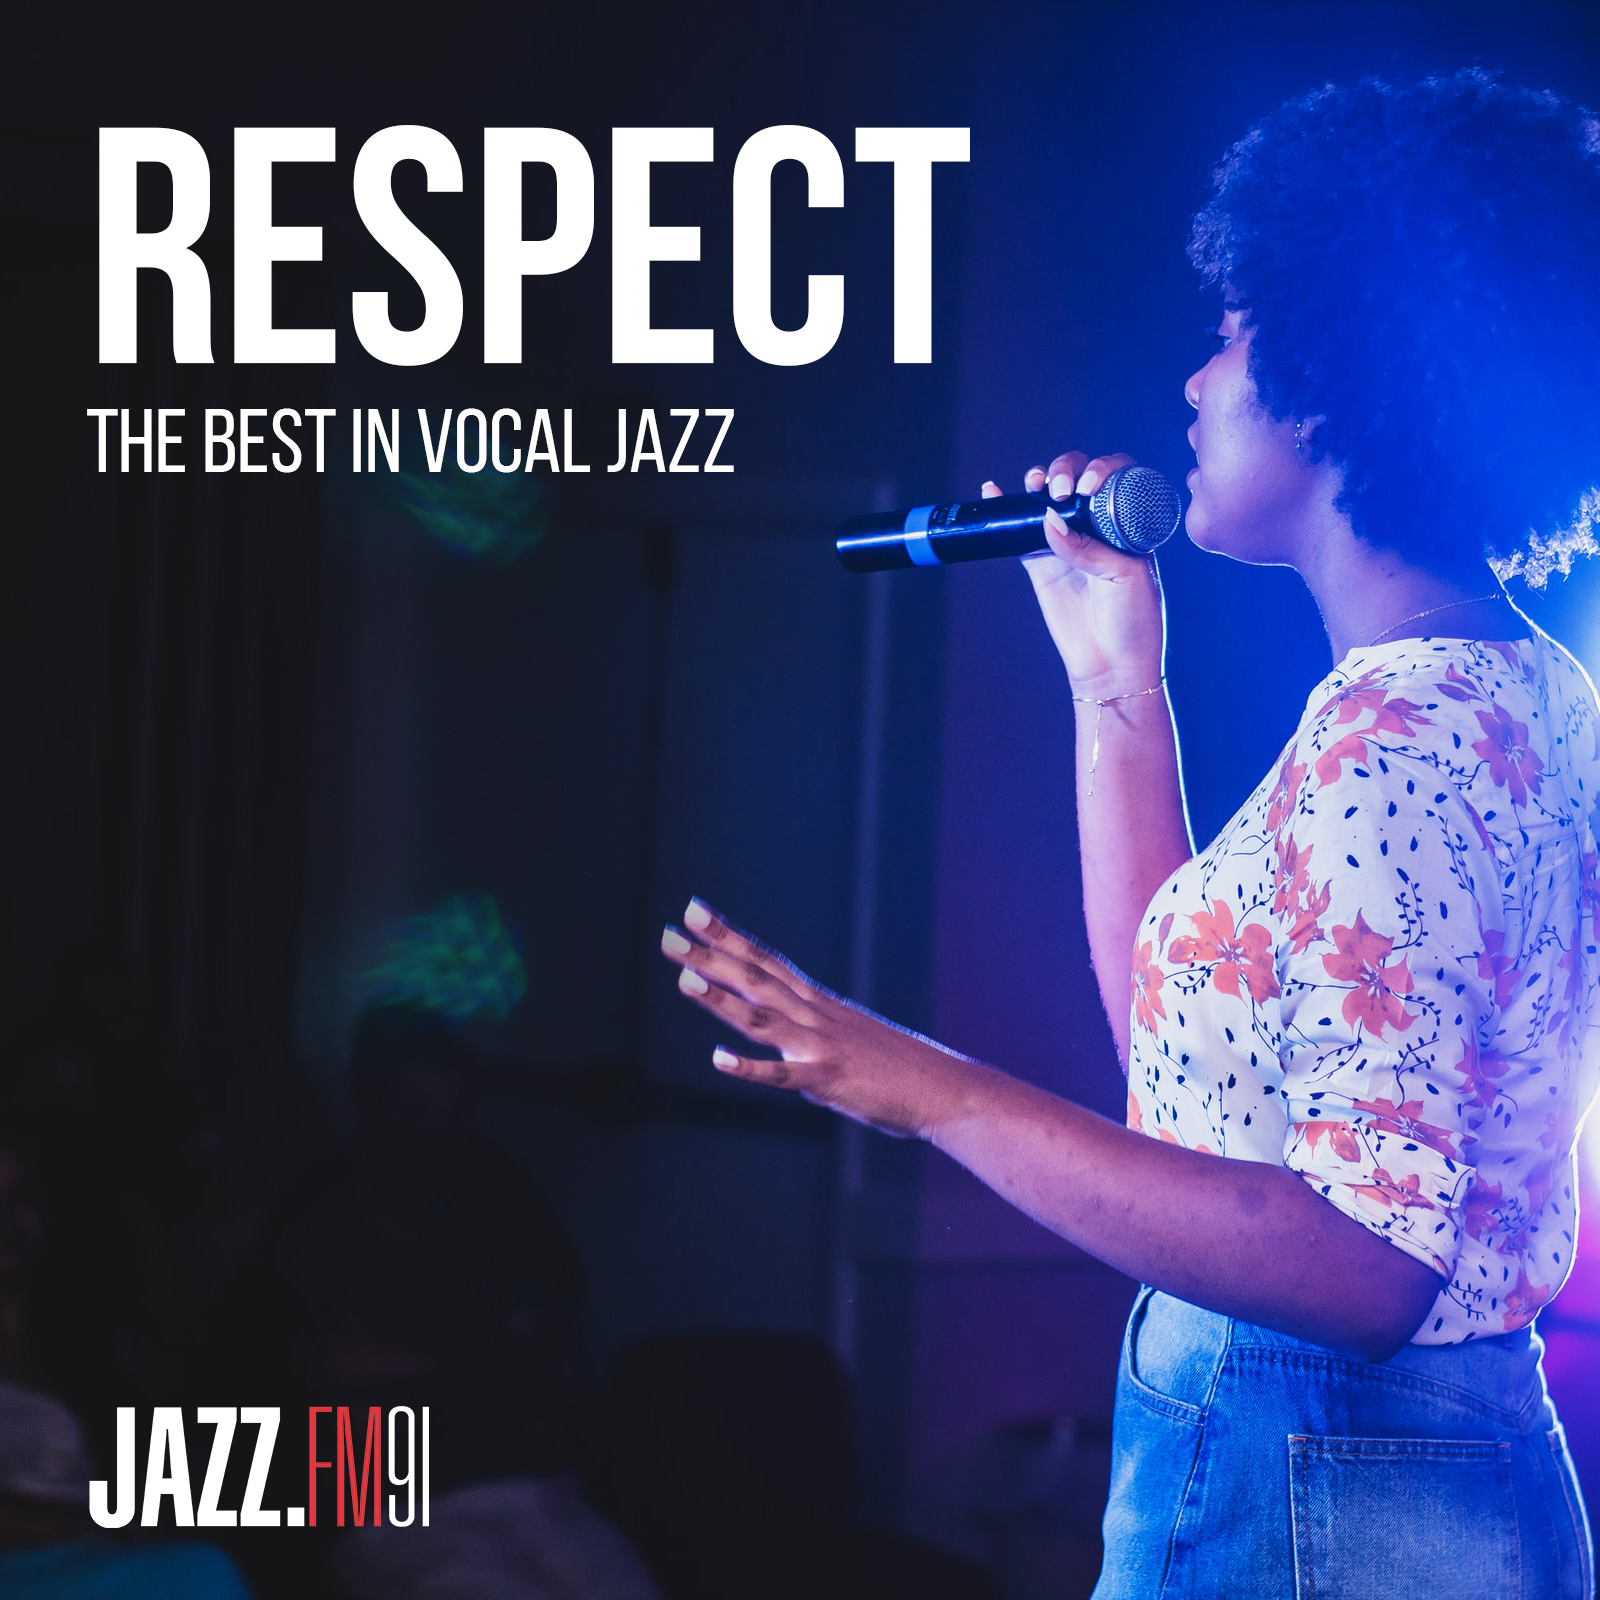 RESPECT: The Best in Vocal Jazz